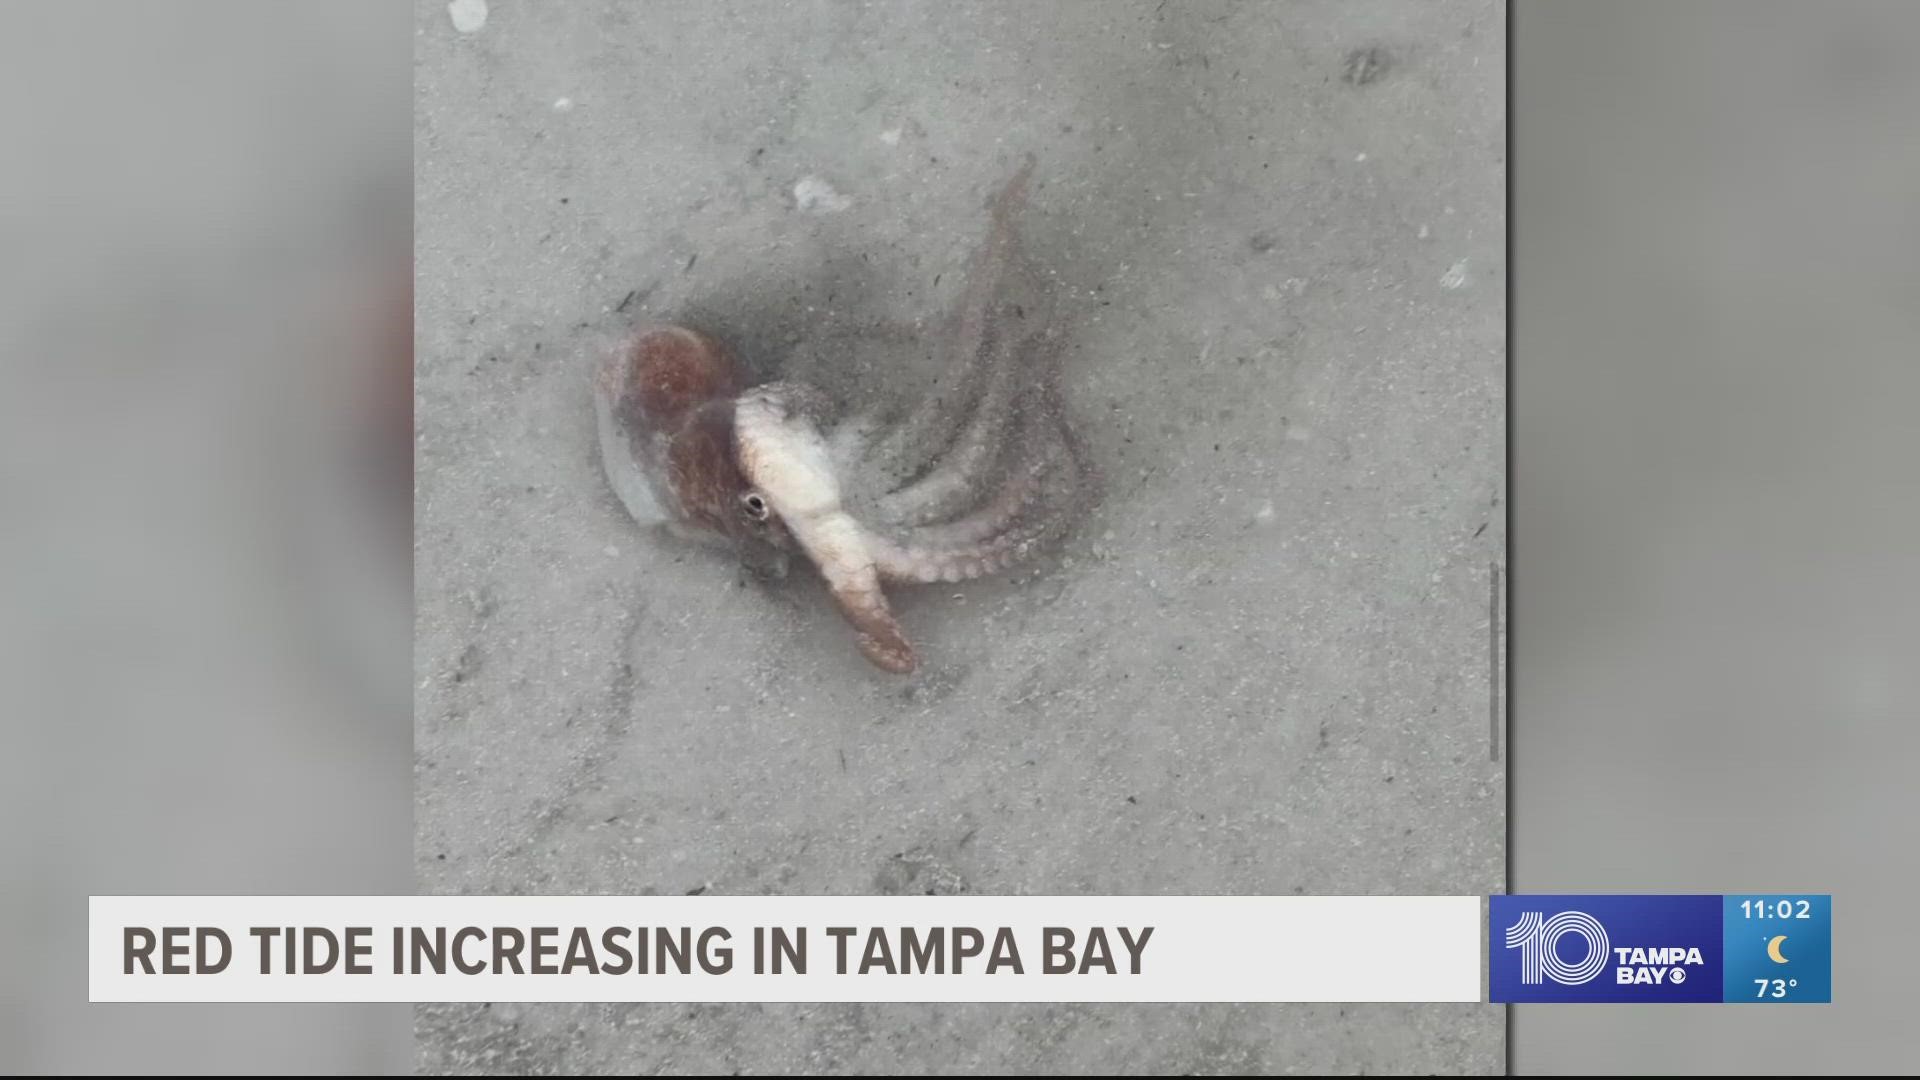 Tampa Bay area beaches are seeing varied effects of red tide, which could cause respiratory issues for people.